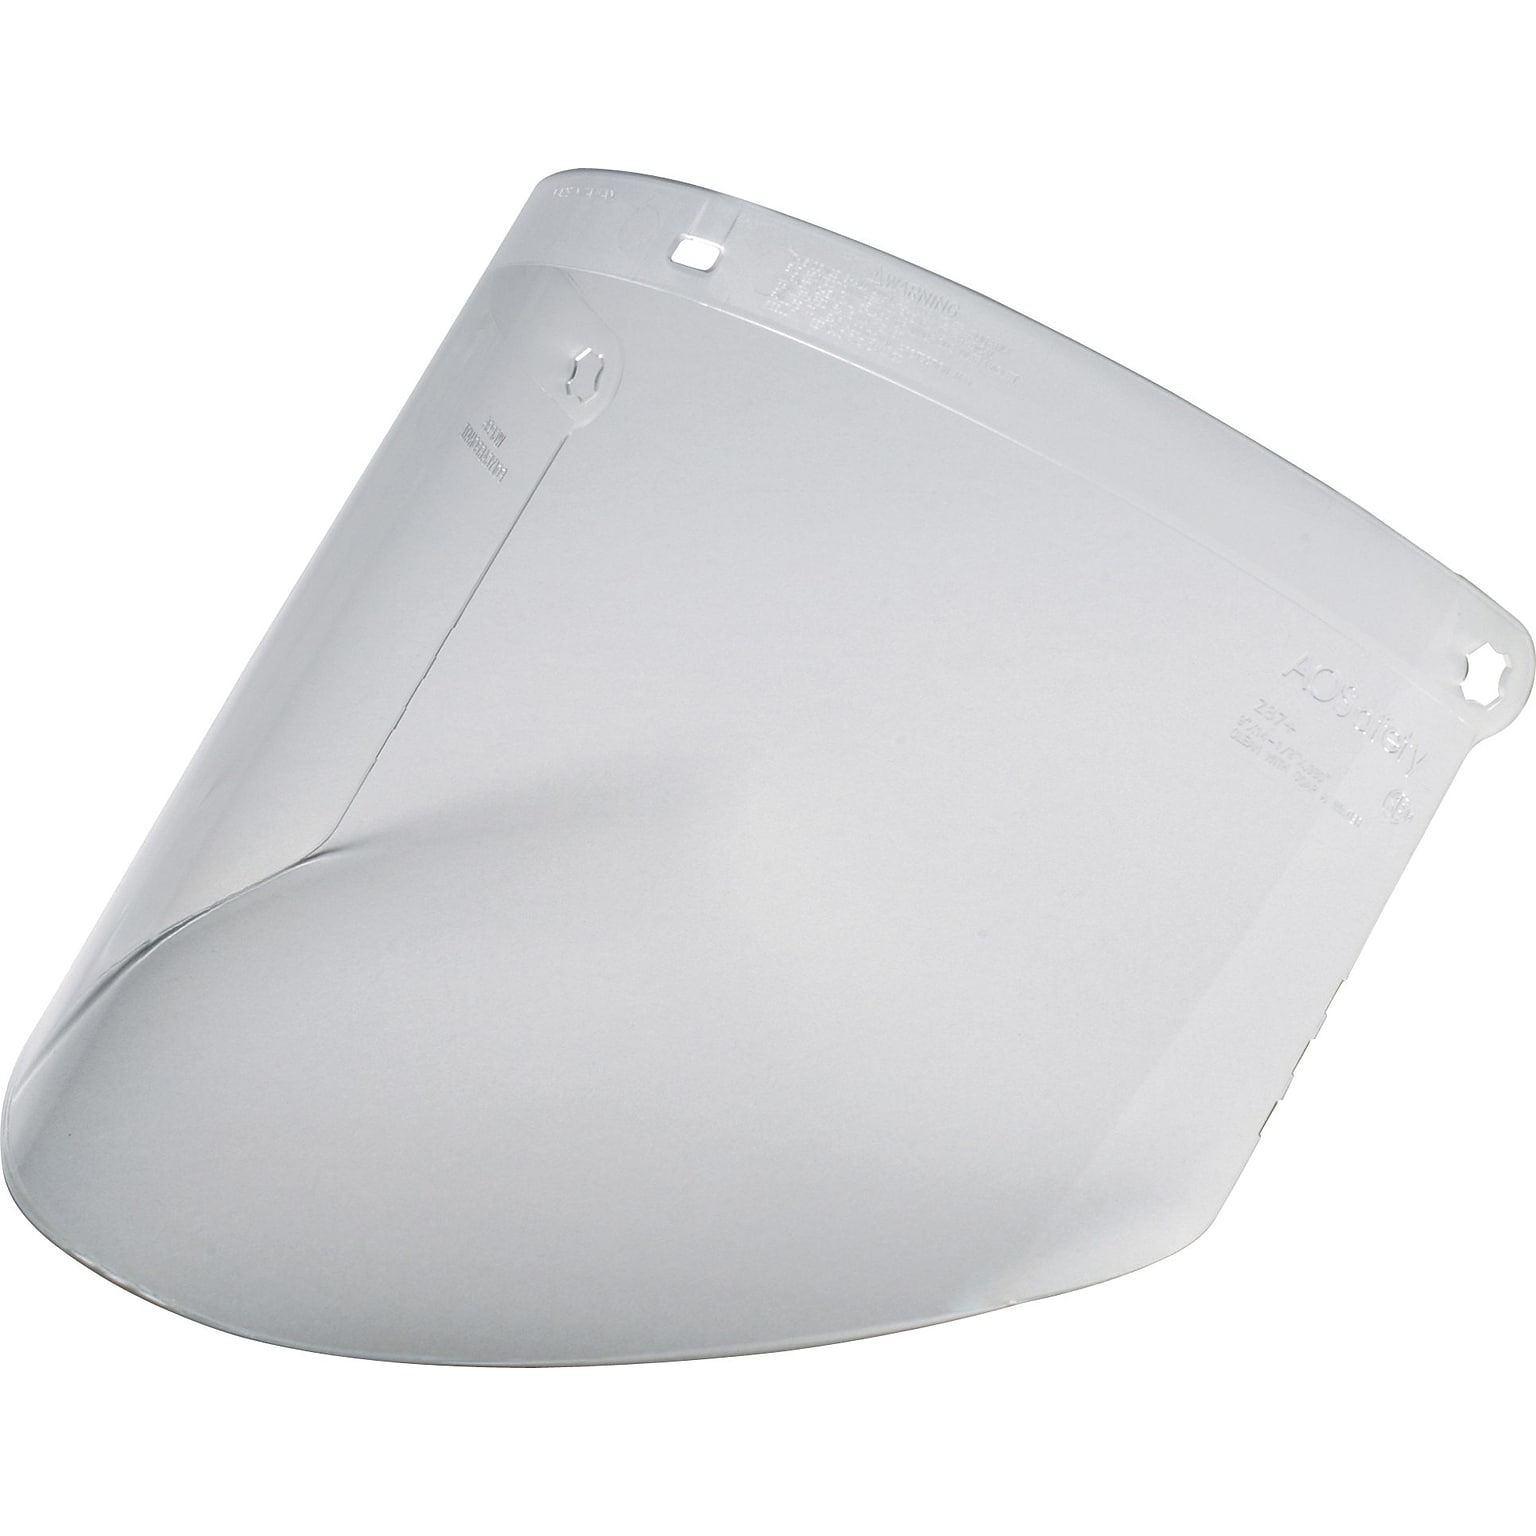 AO Tuffmaster® Clear Polycarbonate Face Shield Visor, 9 in (H) x 14 1/4 in (W) x 0.08 in (T), Shield Only